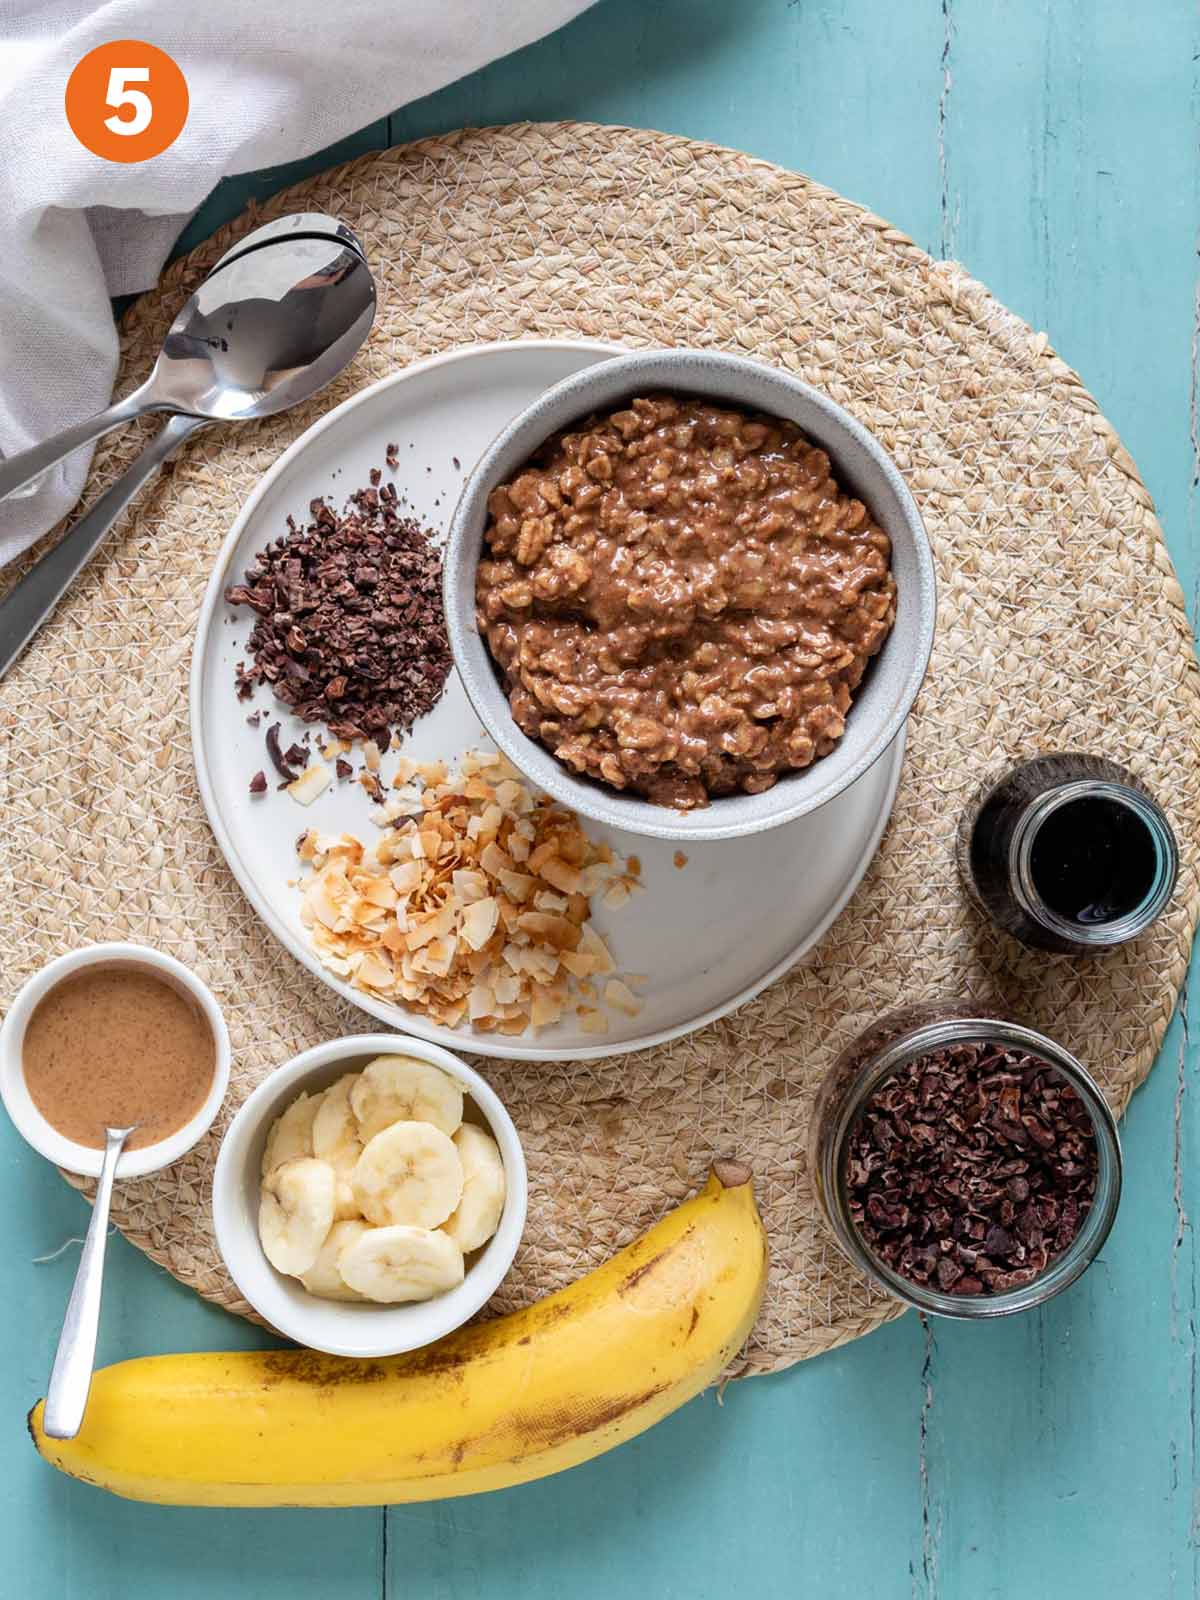 Chocolate oatmeal in a bowl on a plate surrounded by various toppings.